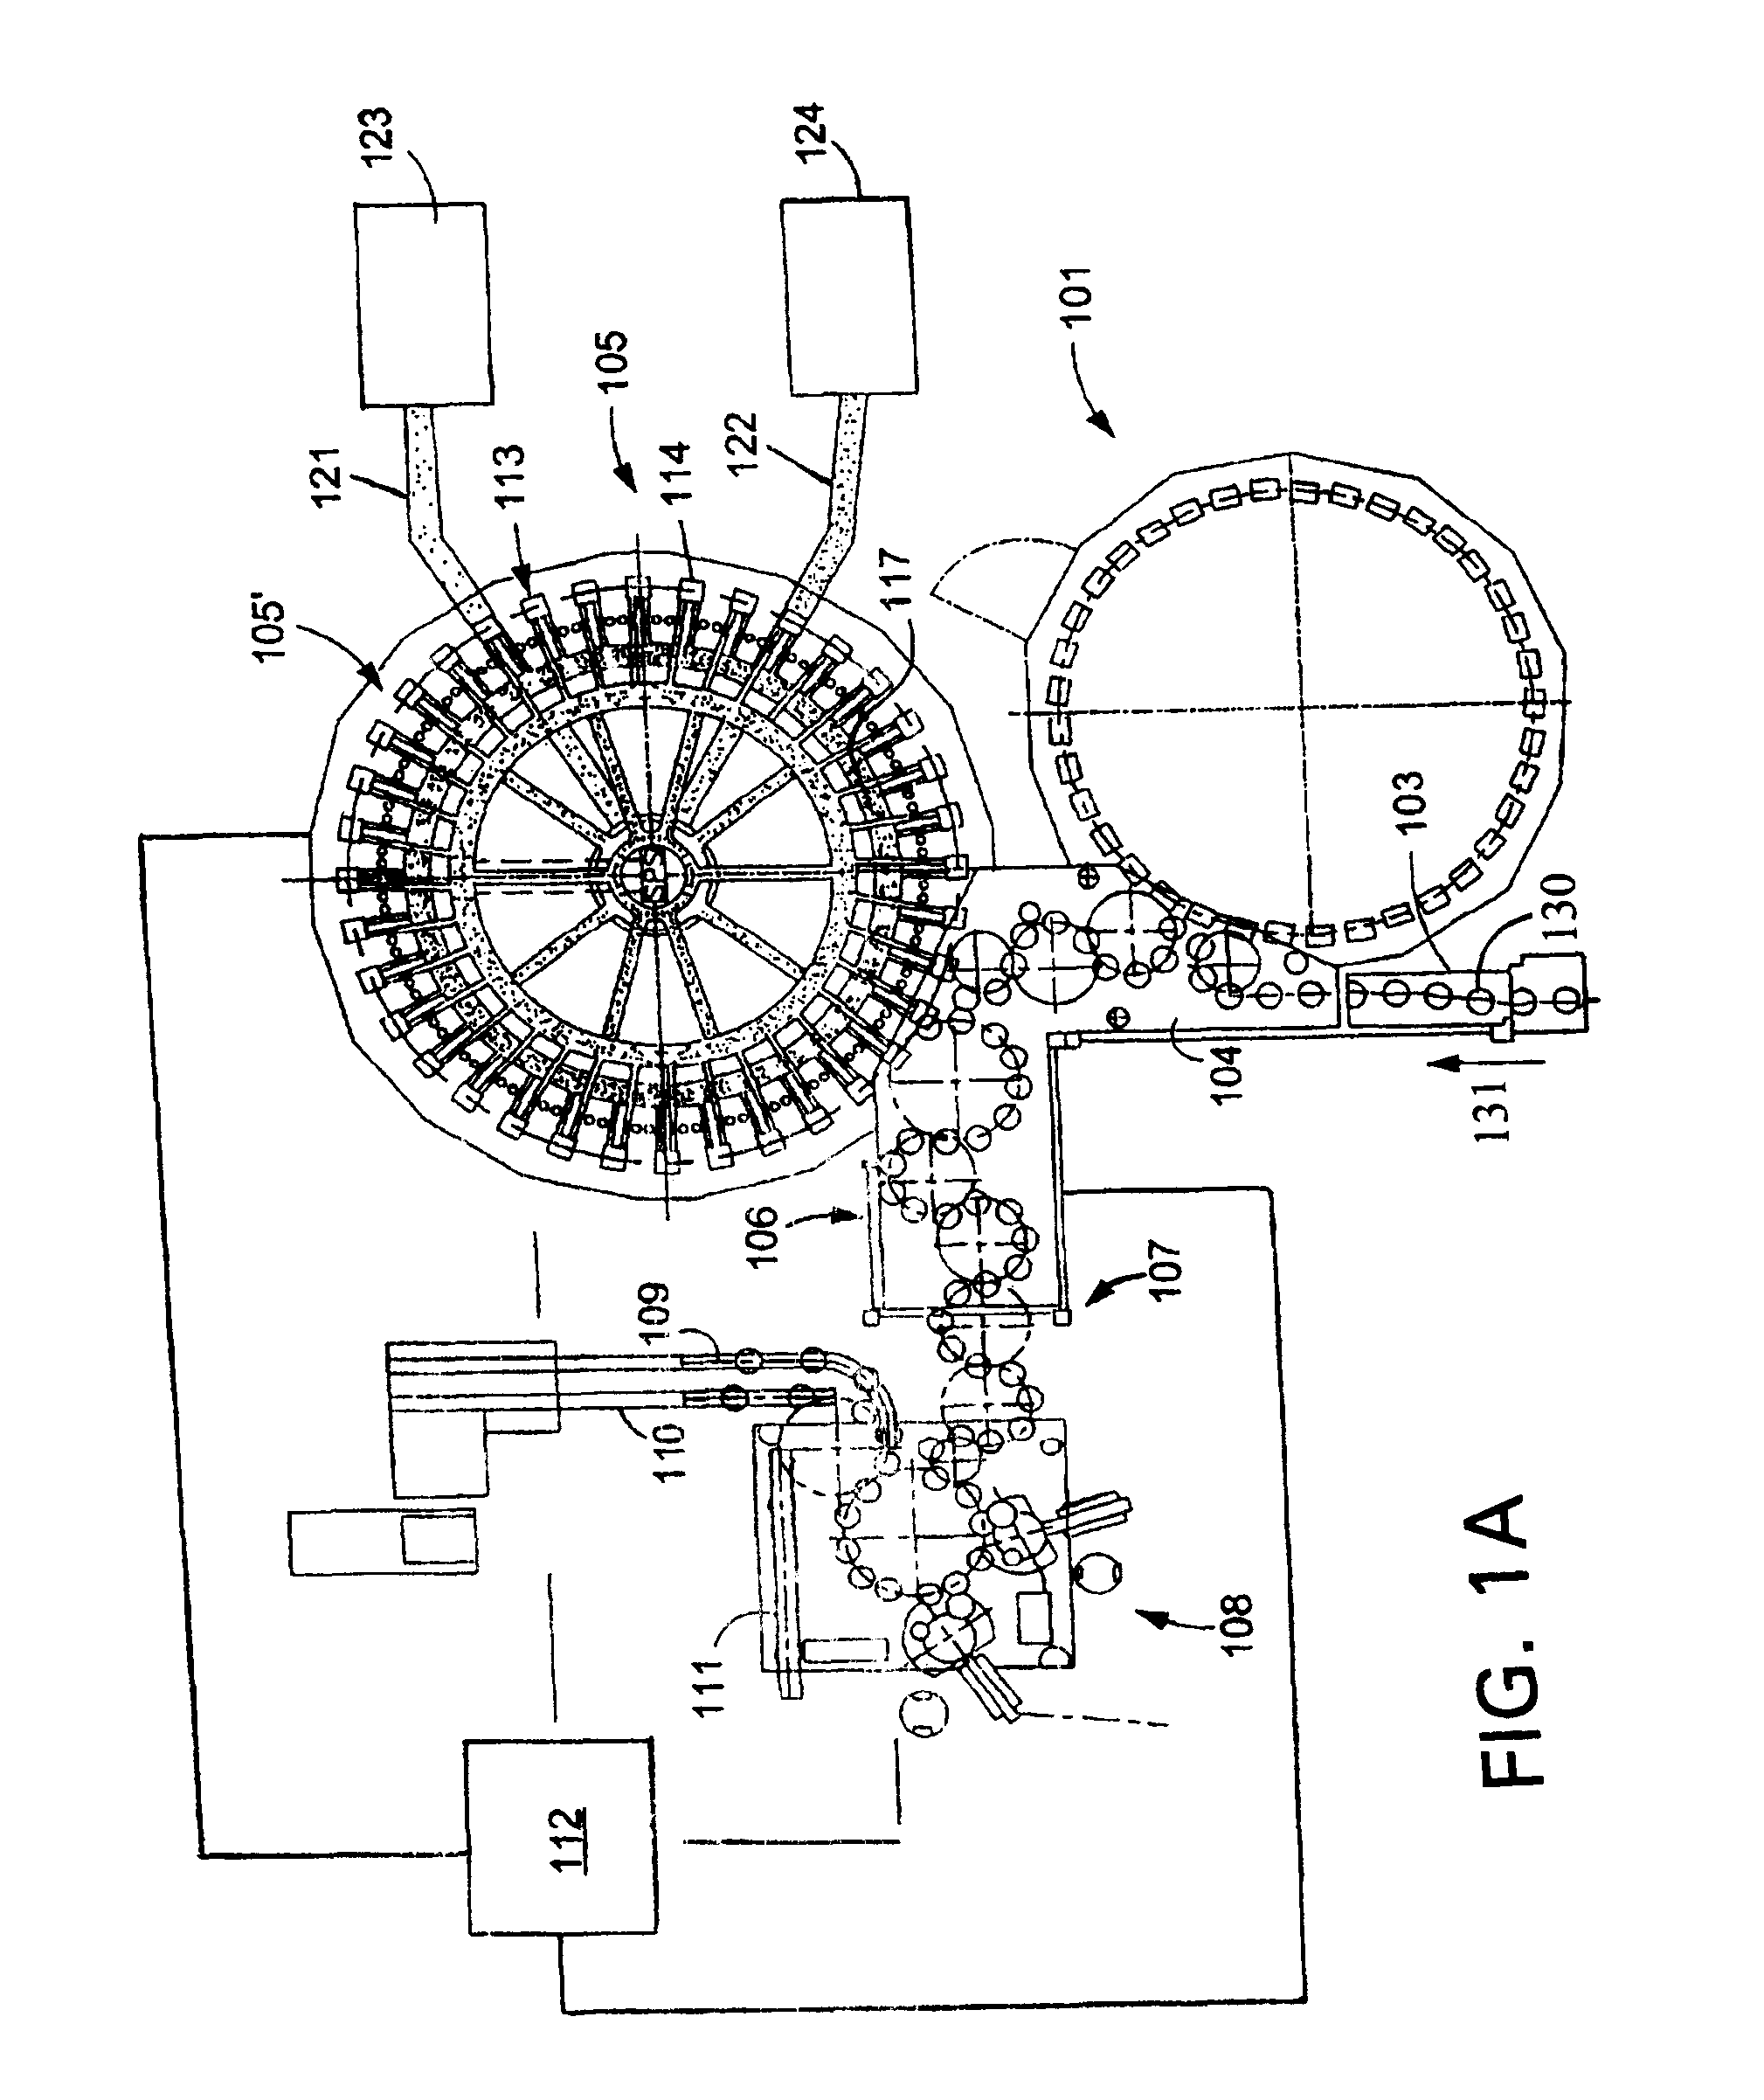 Method and apparatus for the circumferential labeling of a run of blow molded bottles where the individual bottles in the run have at least one varying dimension due to manufacturing tolerances, the method and apparatus providing more consistent labeling of individual containers in the run of containers